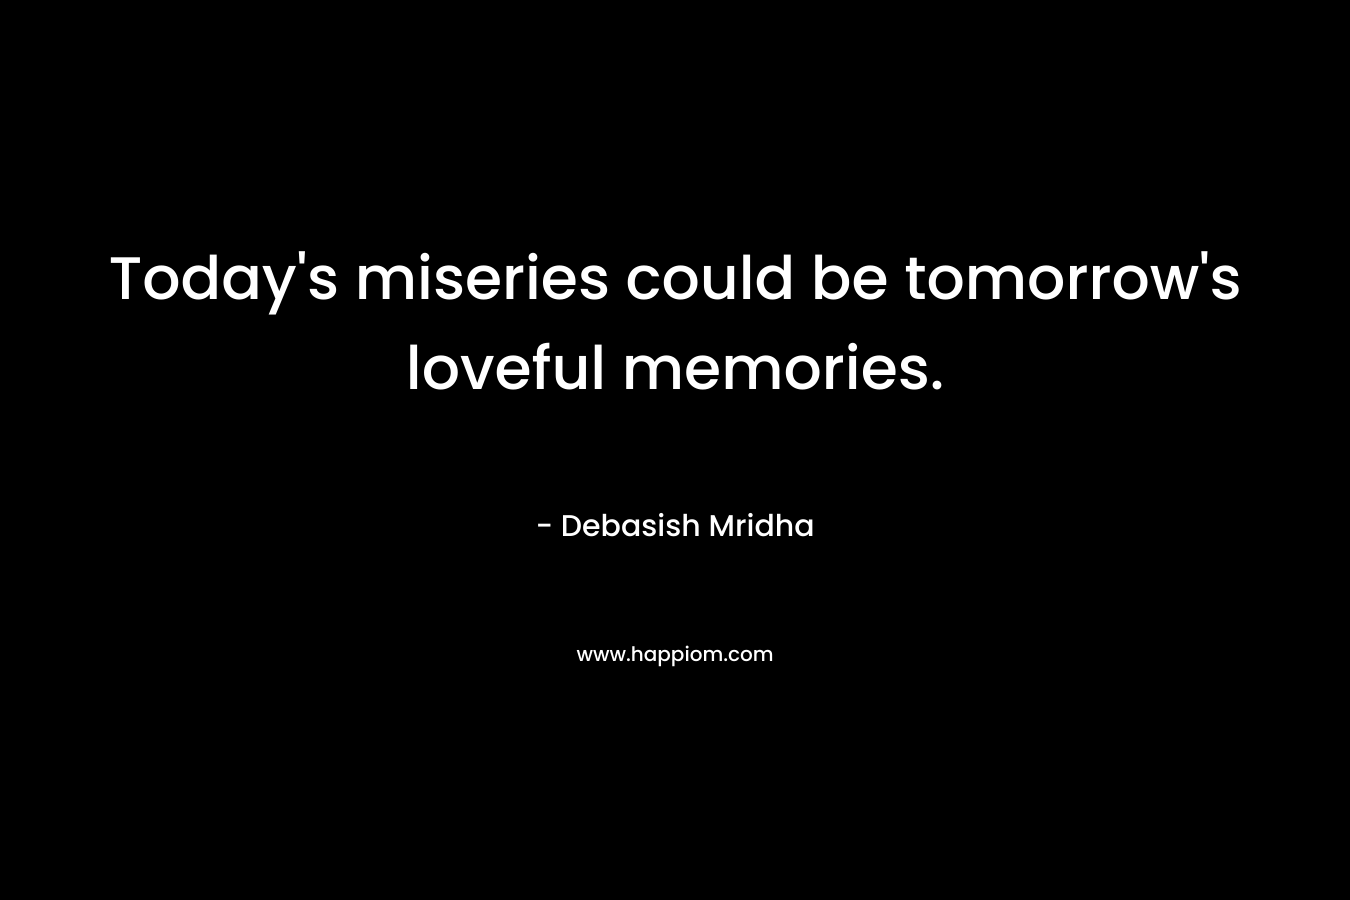 Today's miseries could be tomorrow's loveful memories.